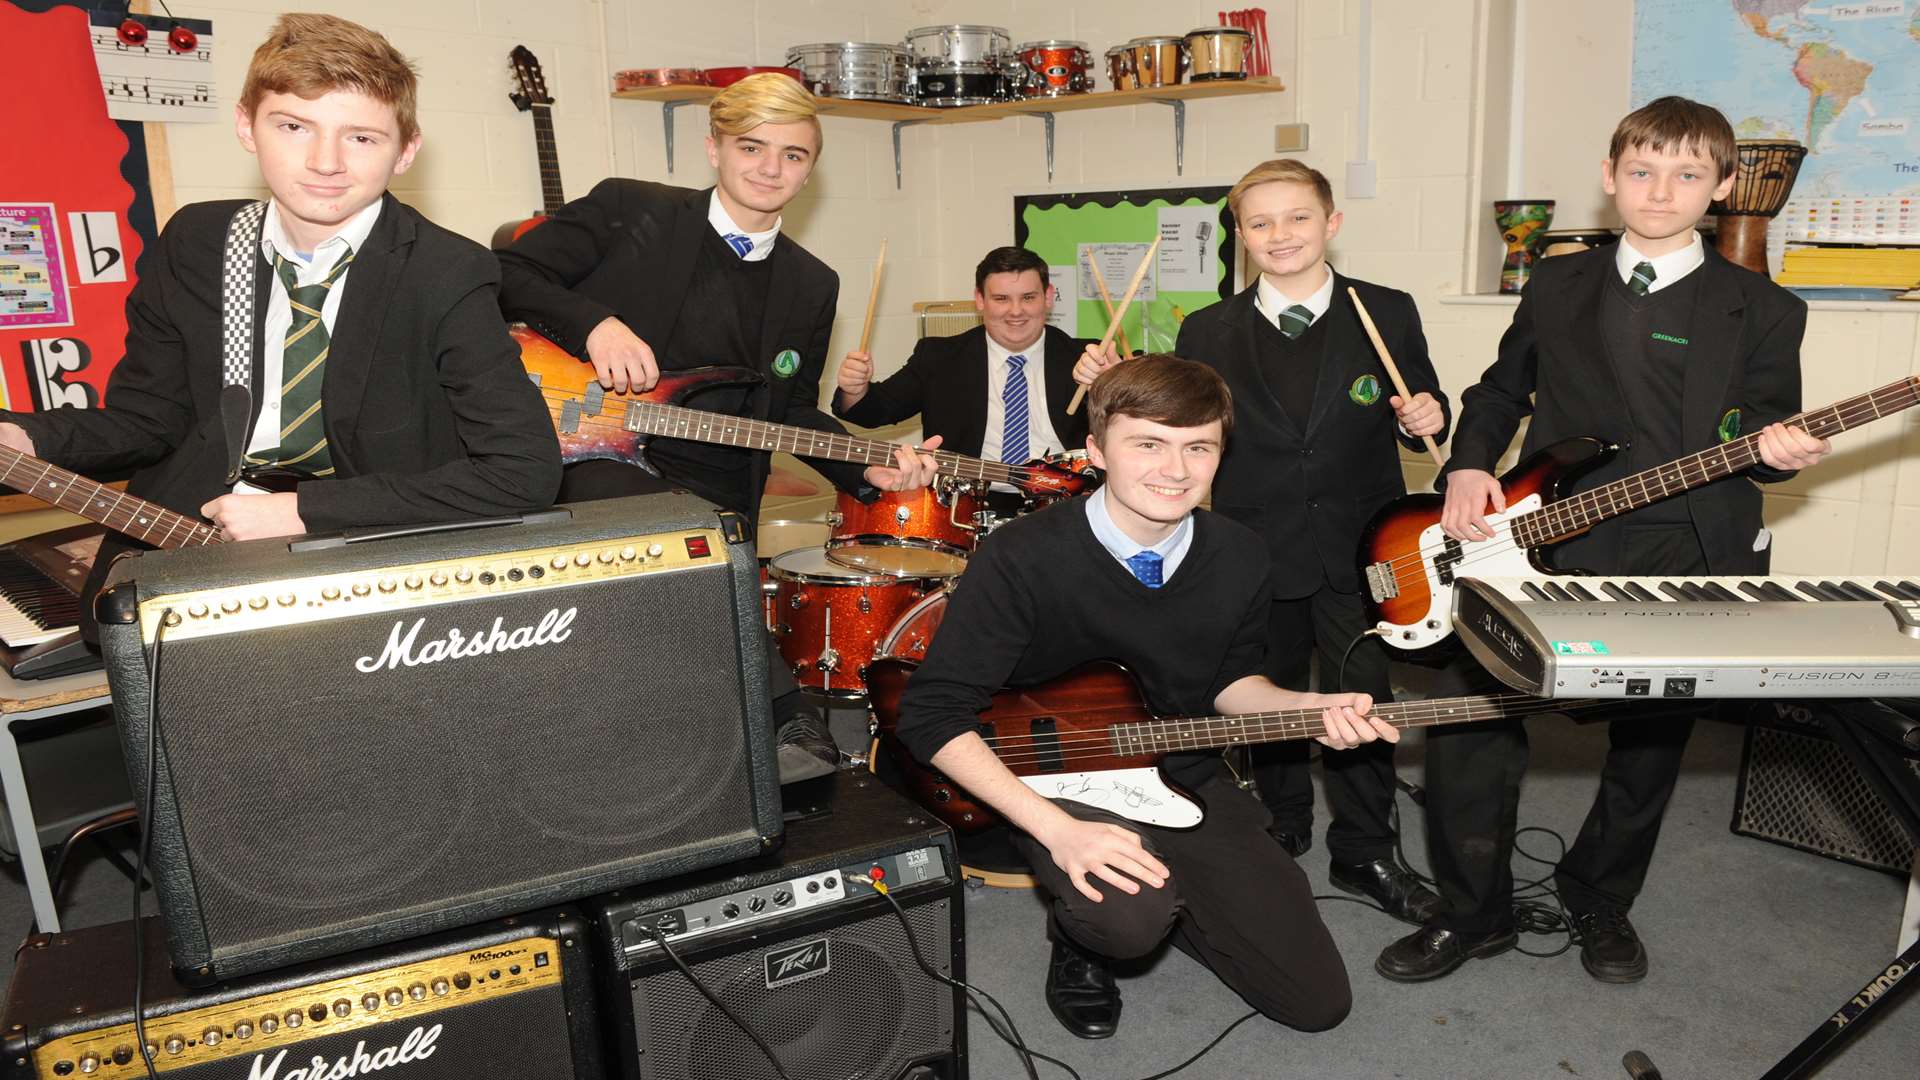 The Greenacre Academy pupils have been rehearsing for the event on Wednesday